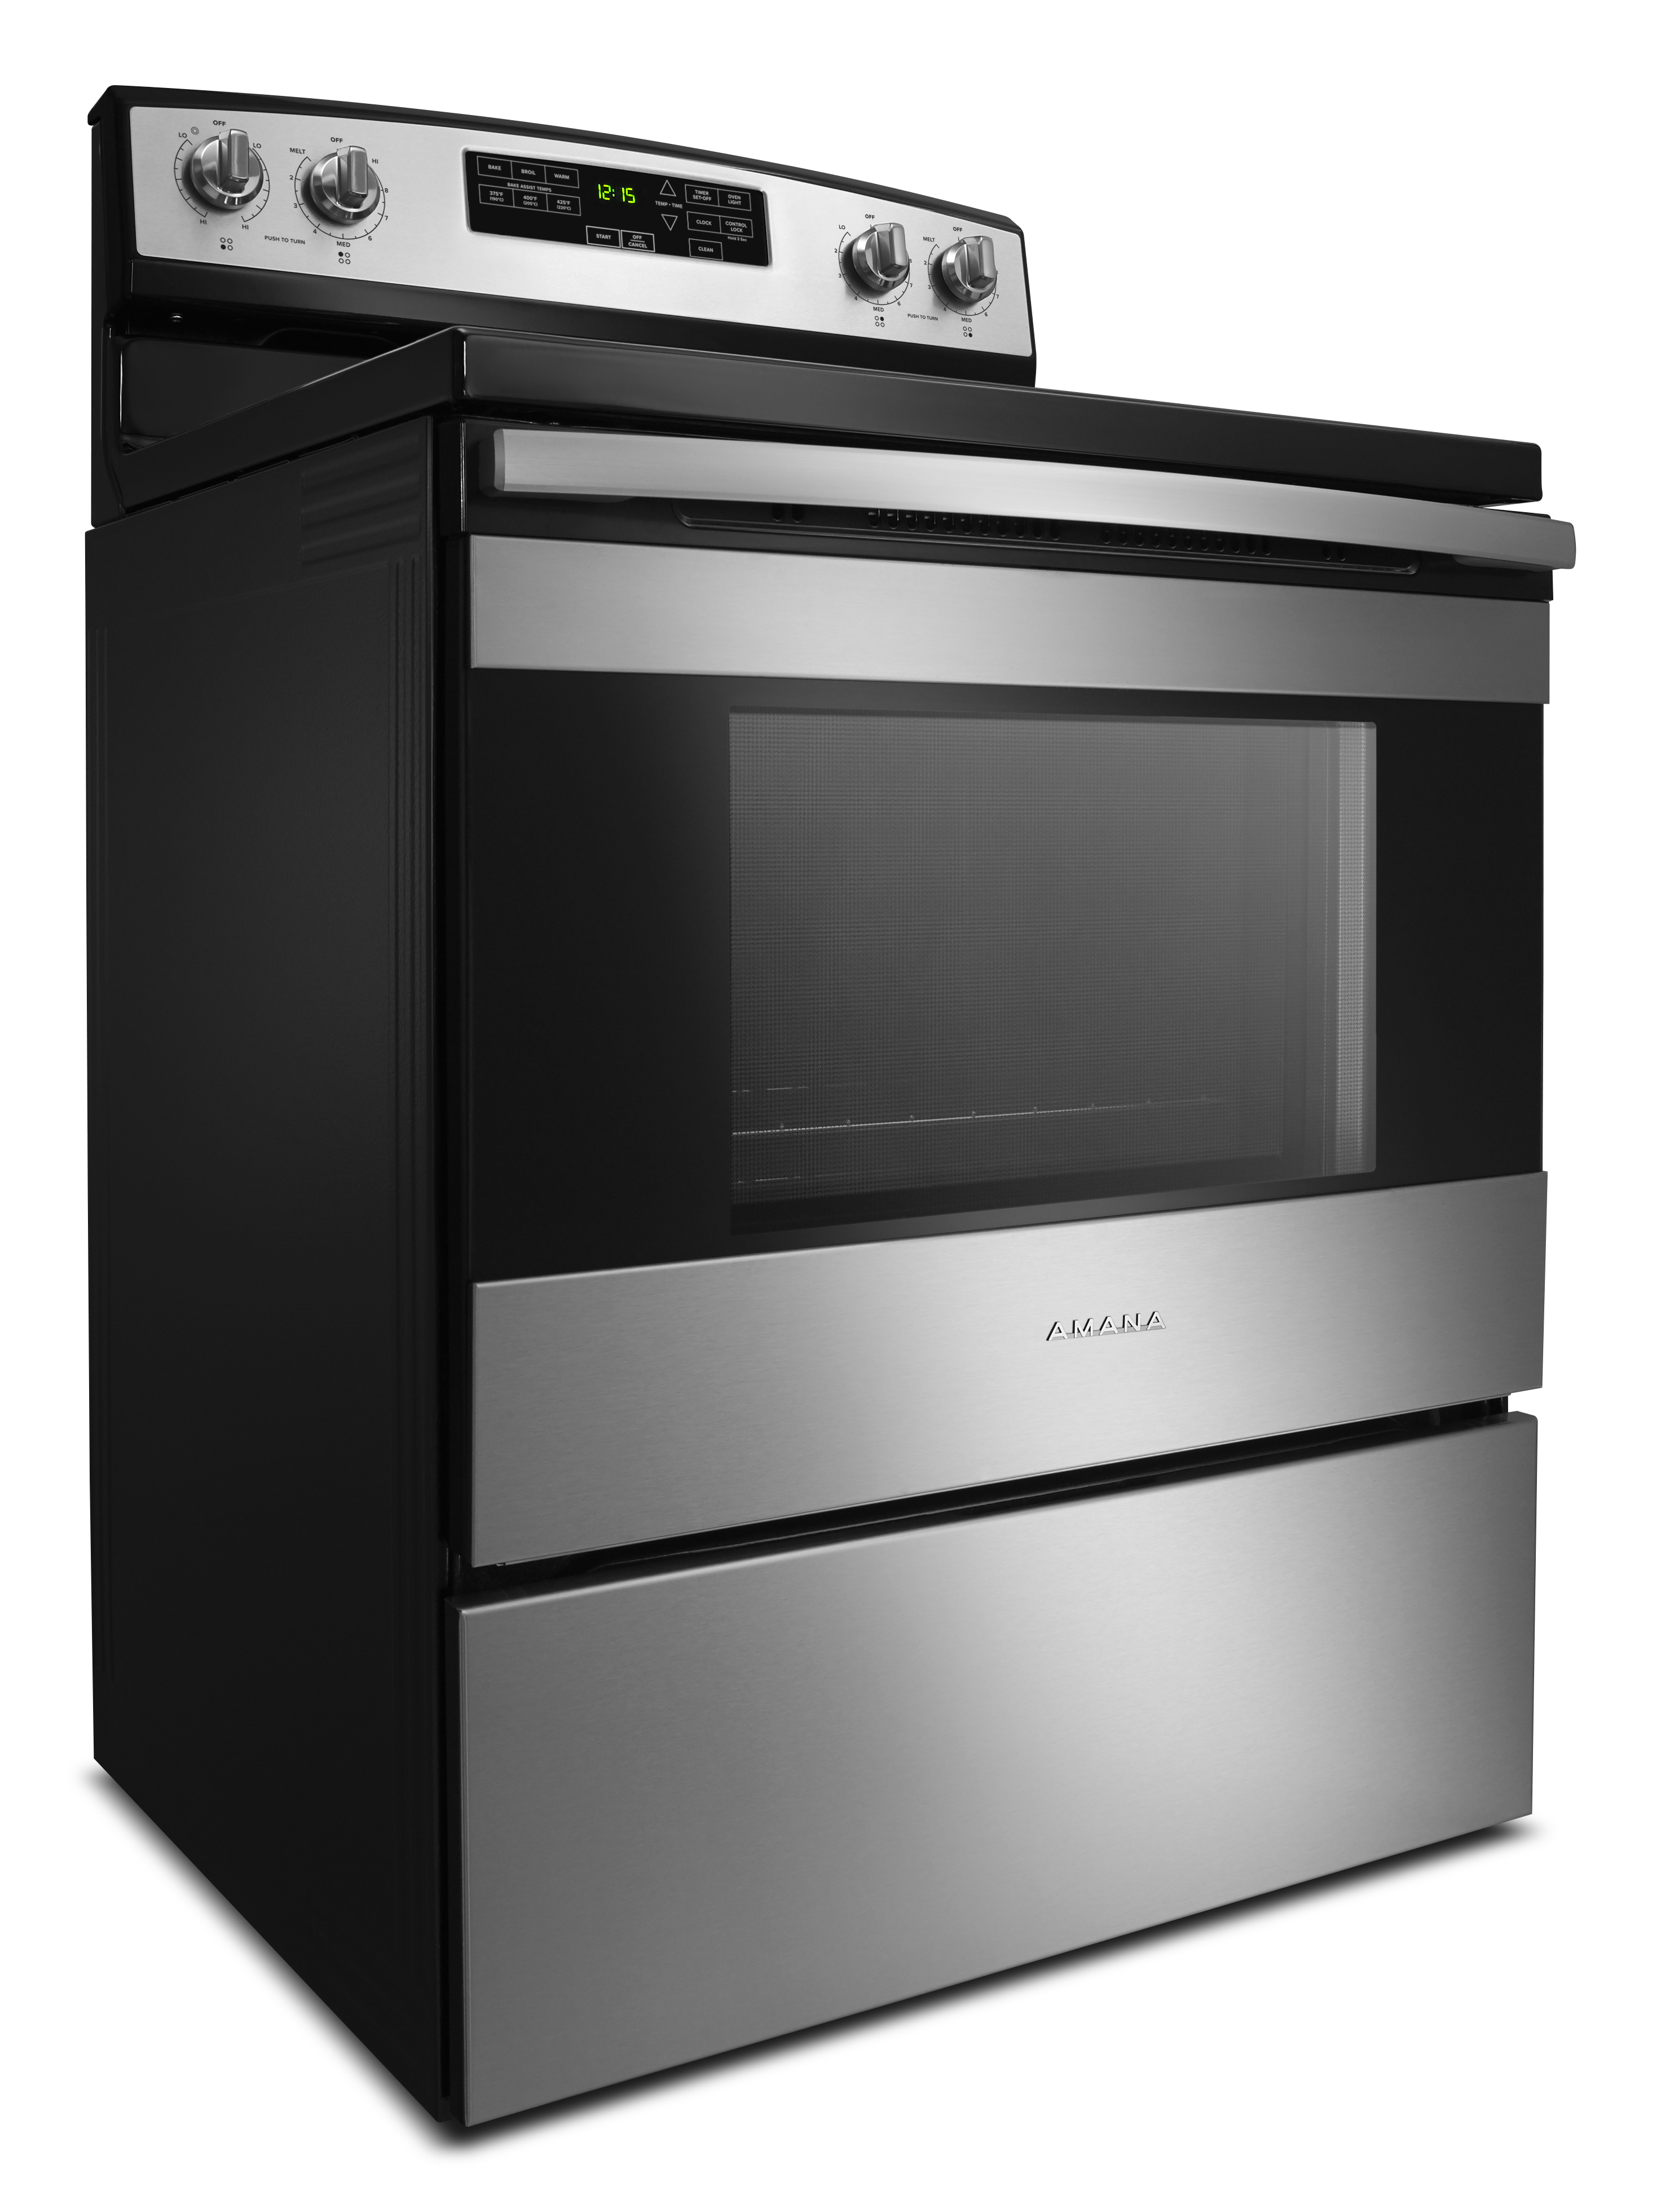 Amana AER6603SFS 4.8 cu. ft. Electric Range w/ Self-Cleaning Option Amana Electric Range Stainless Steel